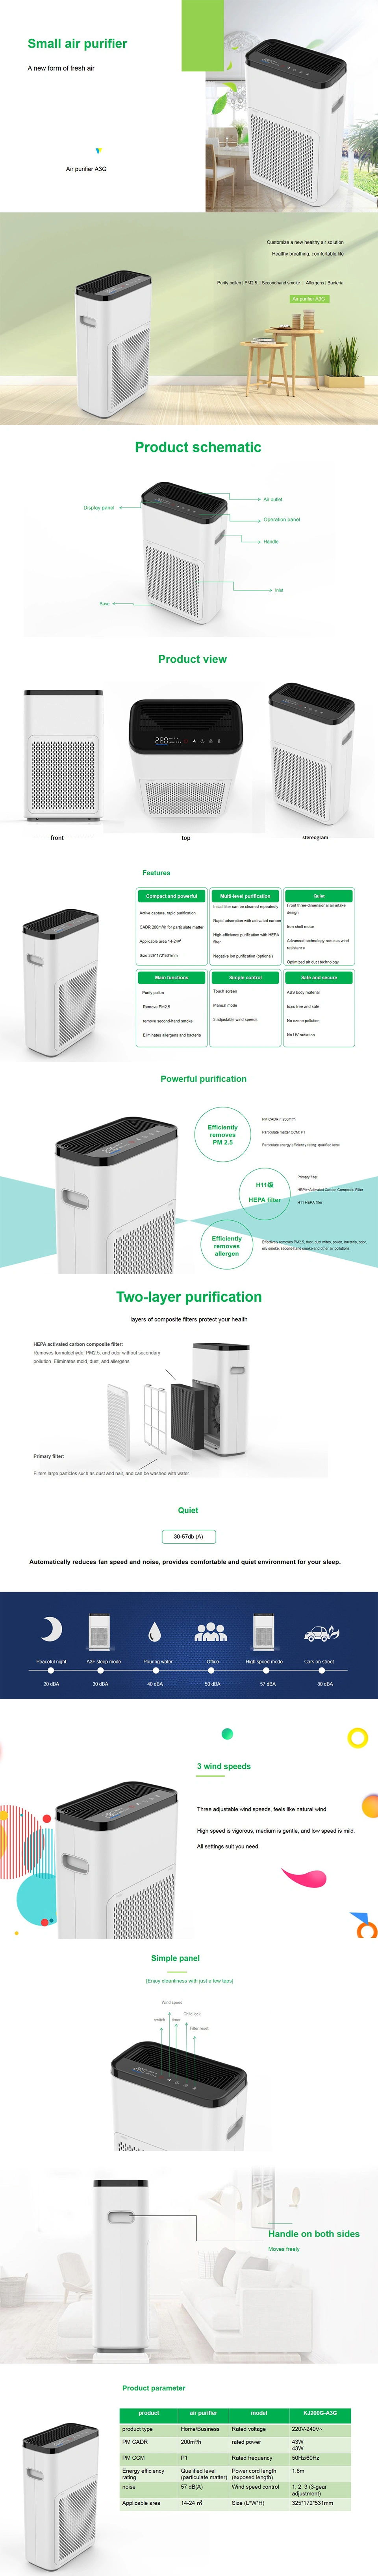 Good Quality Air Purifier with High Efficiency Air Cleaner